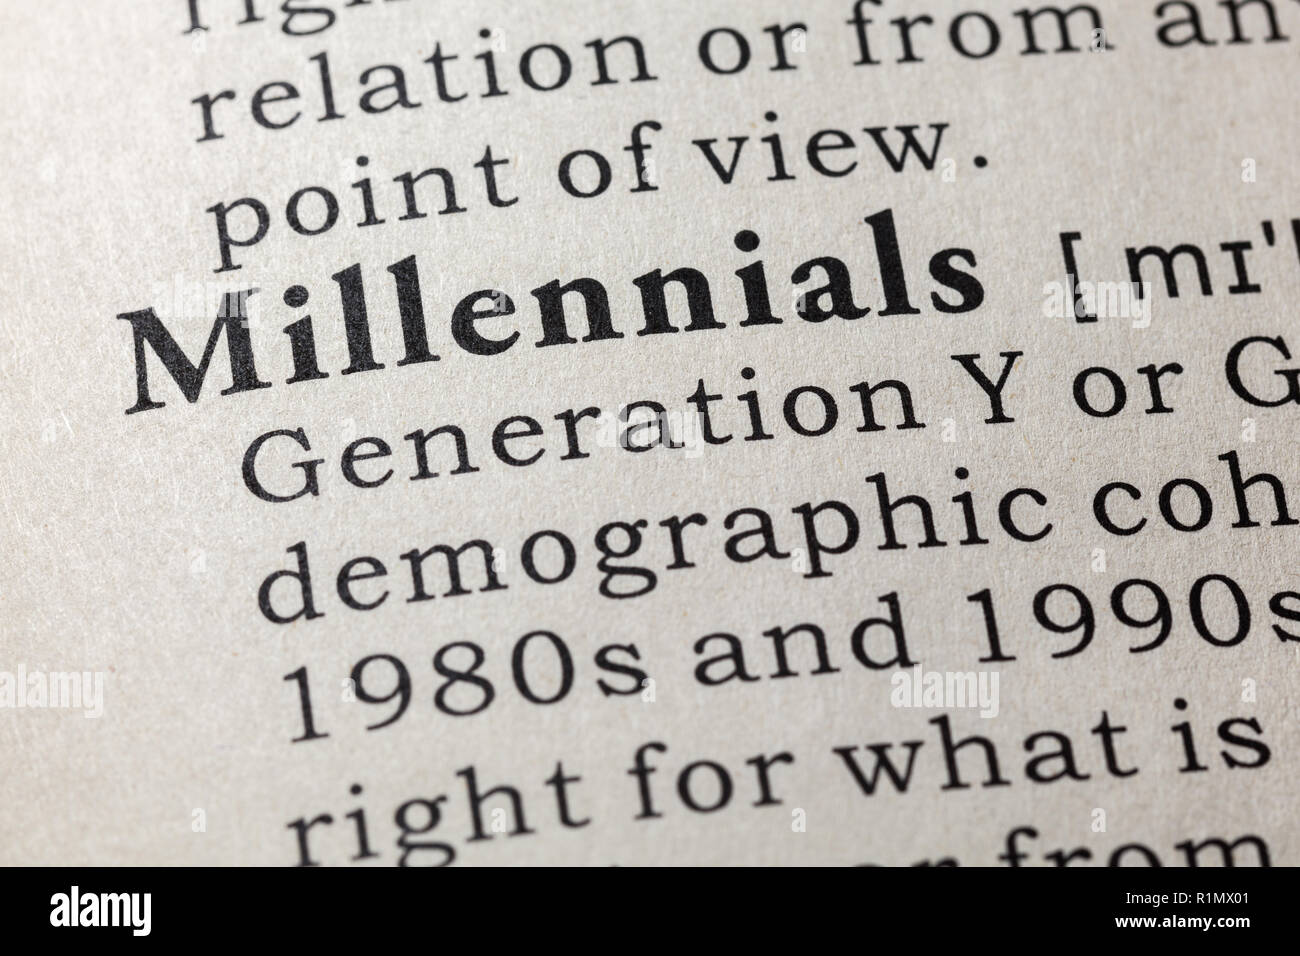 Fake Dictionary, Dictionary definition of the word millennials . including key descriptive words. Stock Photo